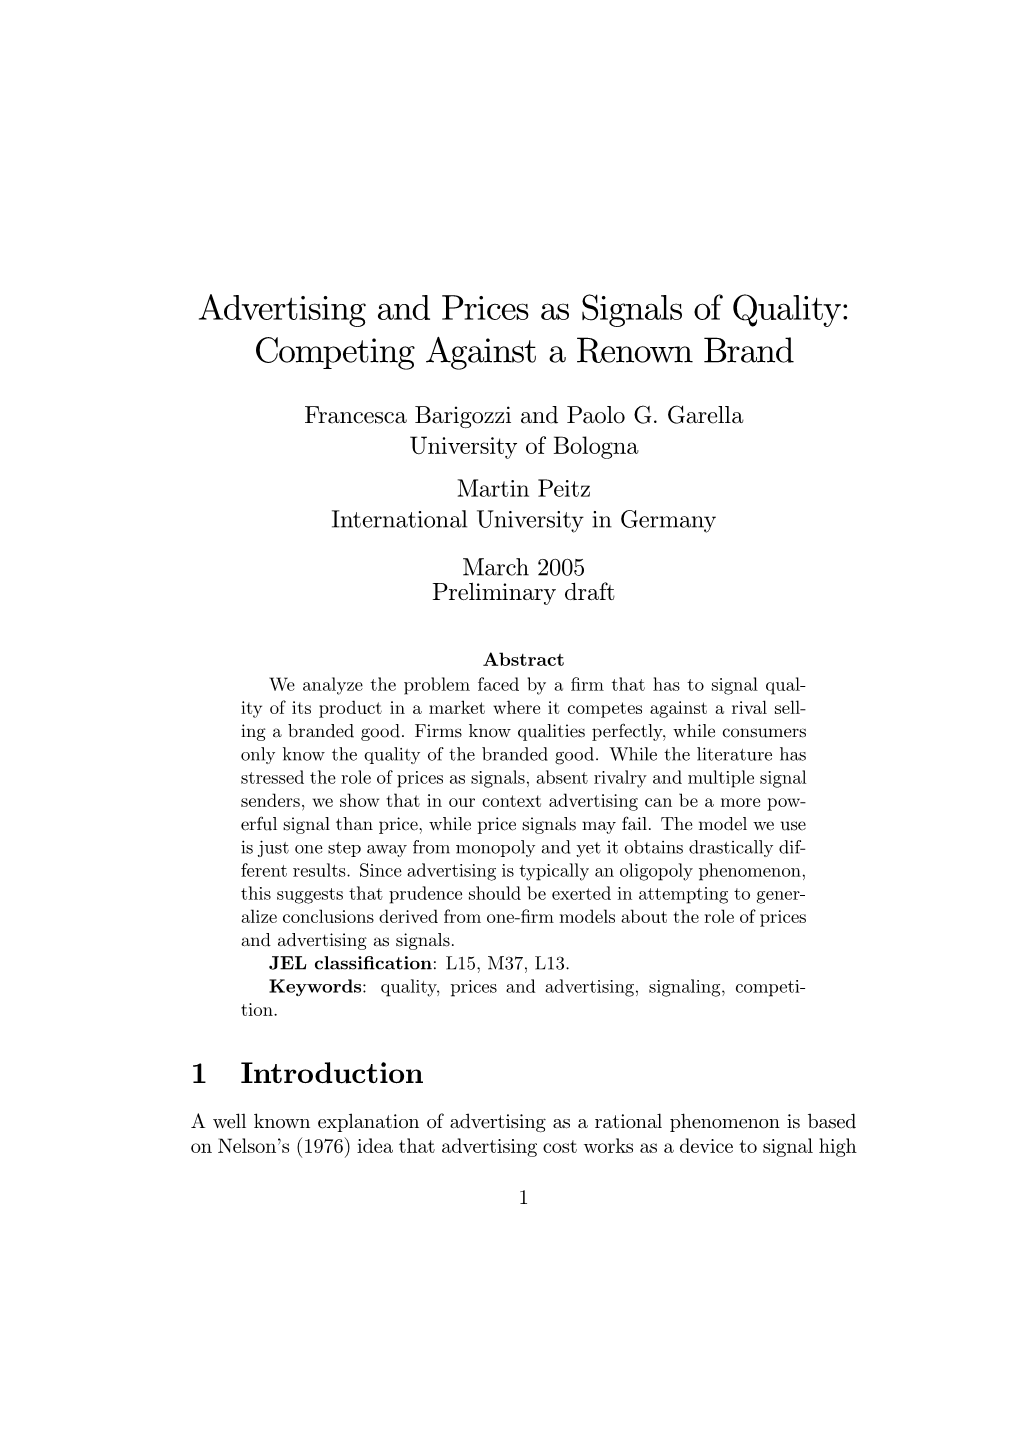 Advertising and Prices As Signals of Quality: Competing Against a Renown Brand